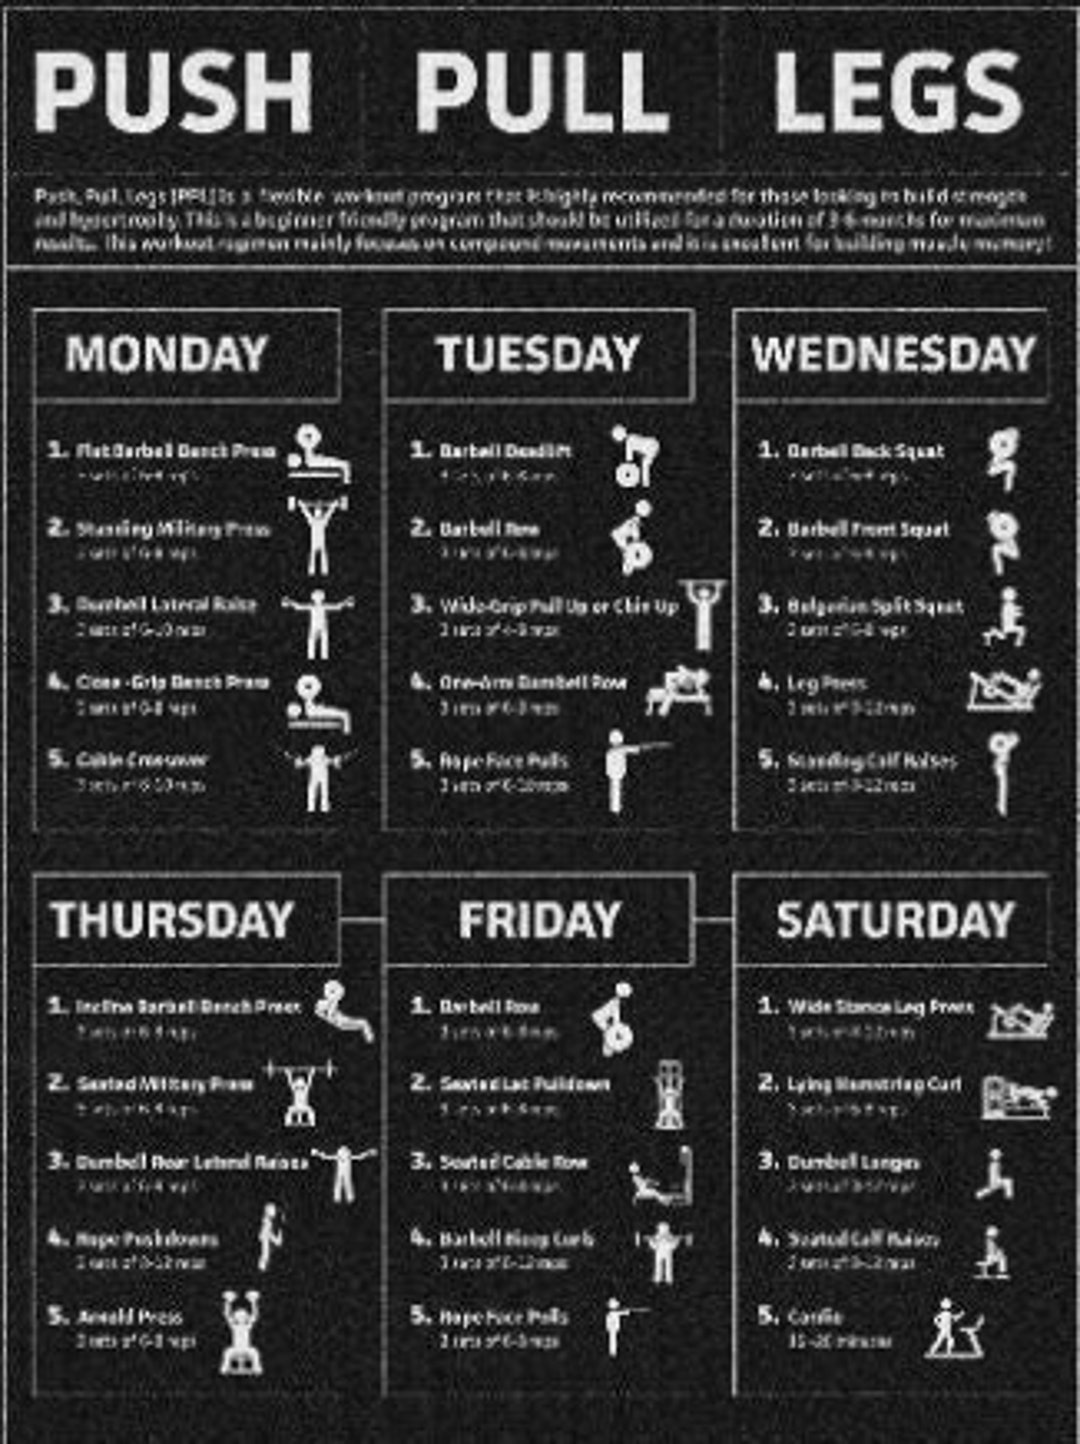 Monday Arms Gym workout · Free workout by WorkoutLabs Fit  Gym workout  plan for women, Beginners gym workout plan, Gym weekly workout plan